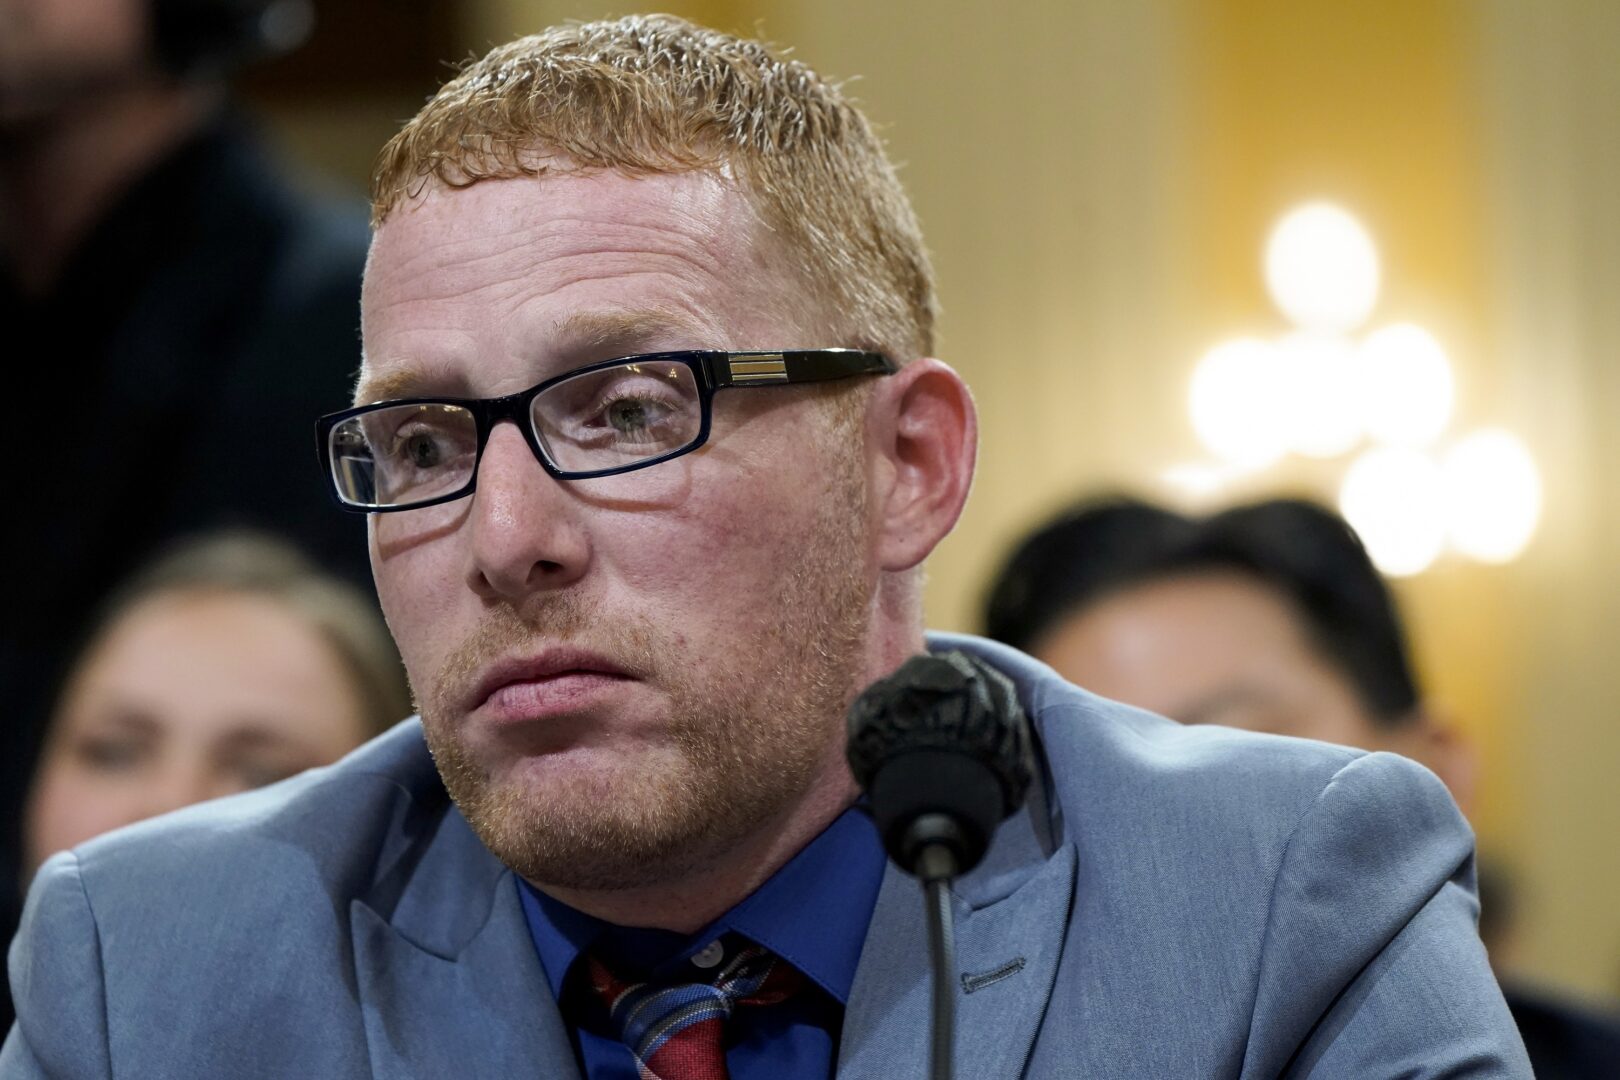 Stephen Ayres, who pleaded guilty last in June 2022 to disorderly and disruptive conduct in a restricted building, testifies as the House select committee investigating the Jan. 6 attack on the U.S. Capitol holds a hearing at the Capitol in Washington, July 12, 2022. 